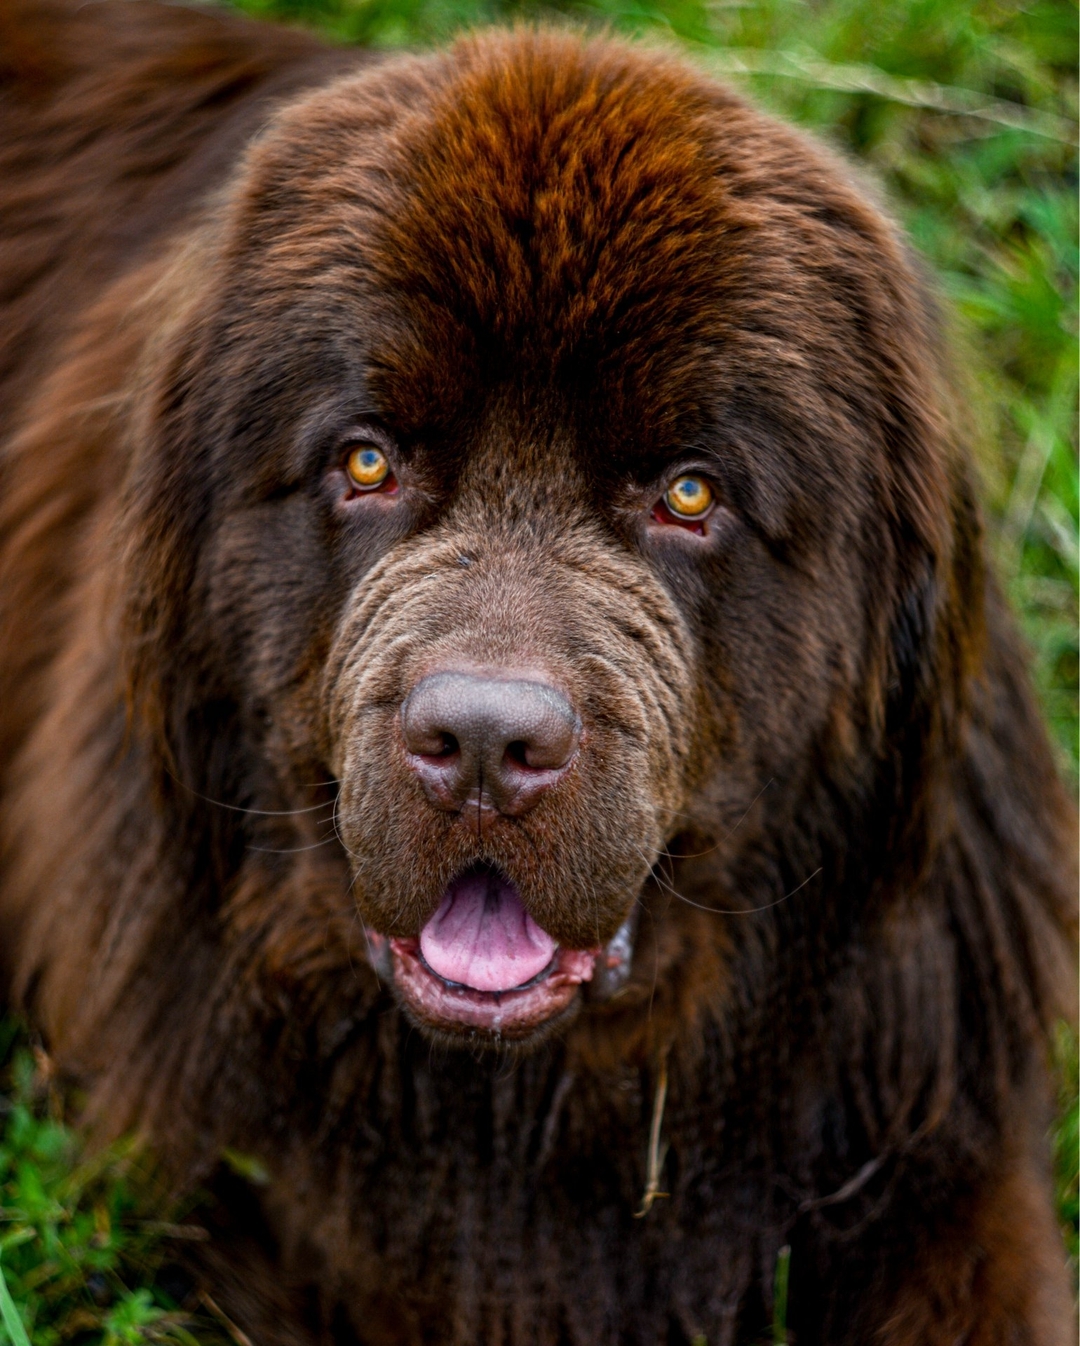 15 Amazing Facts About Newfoundland Dogs You Probably Never Knew 9